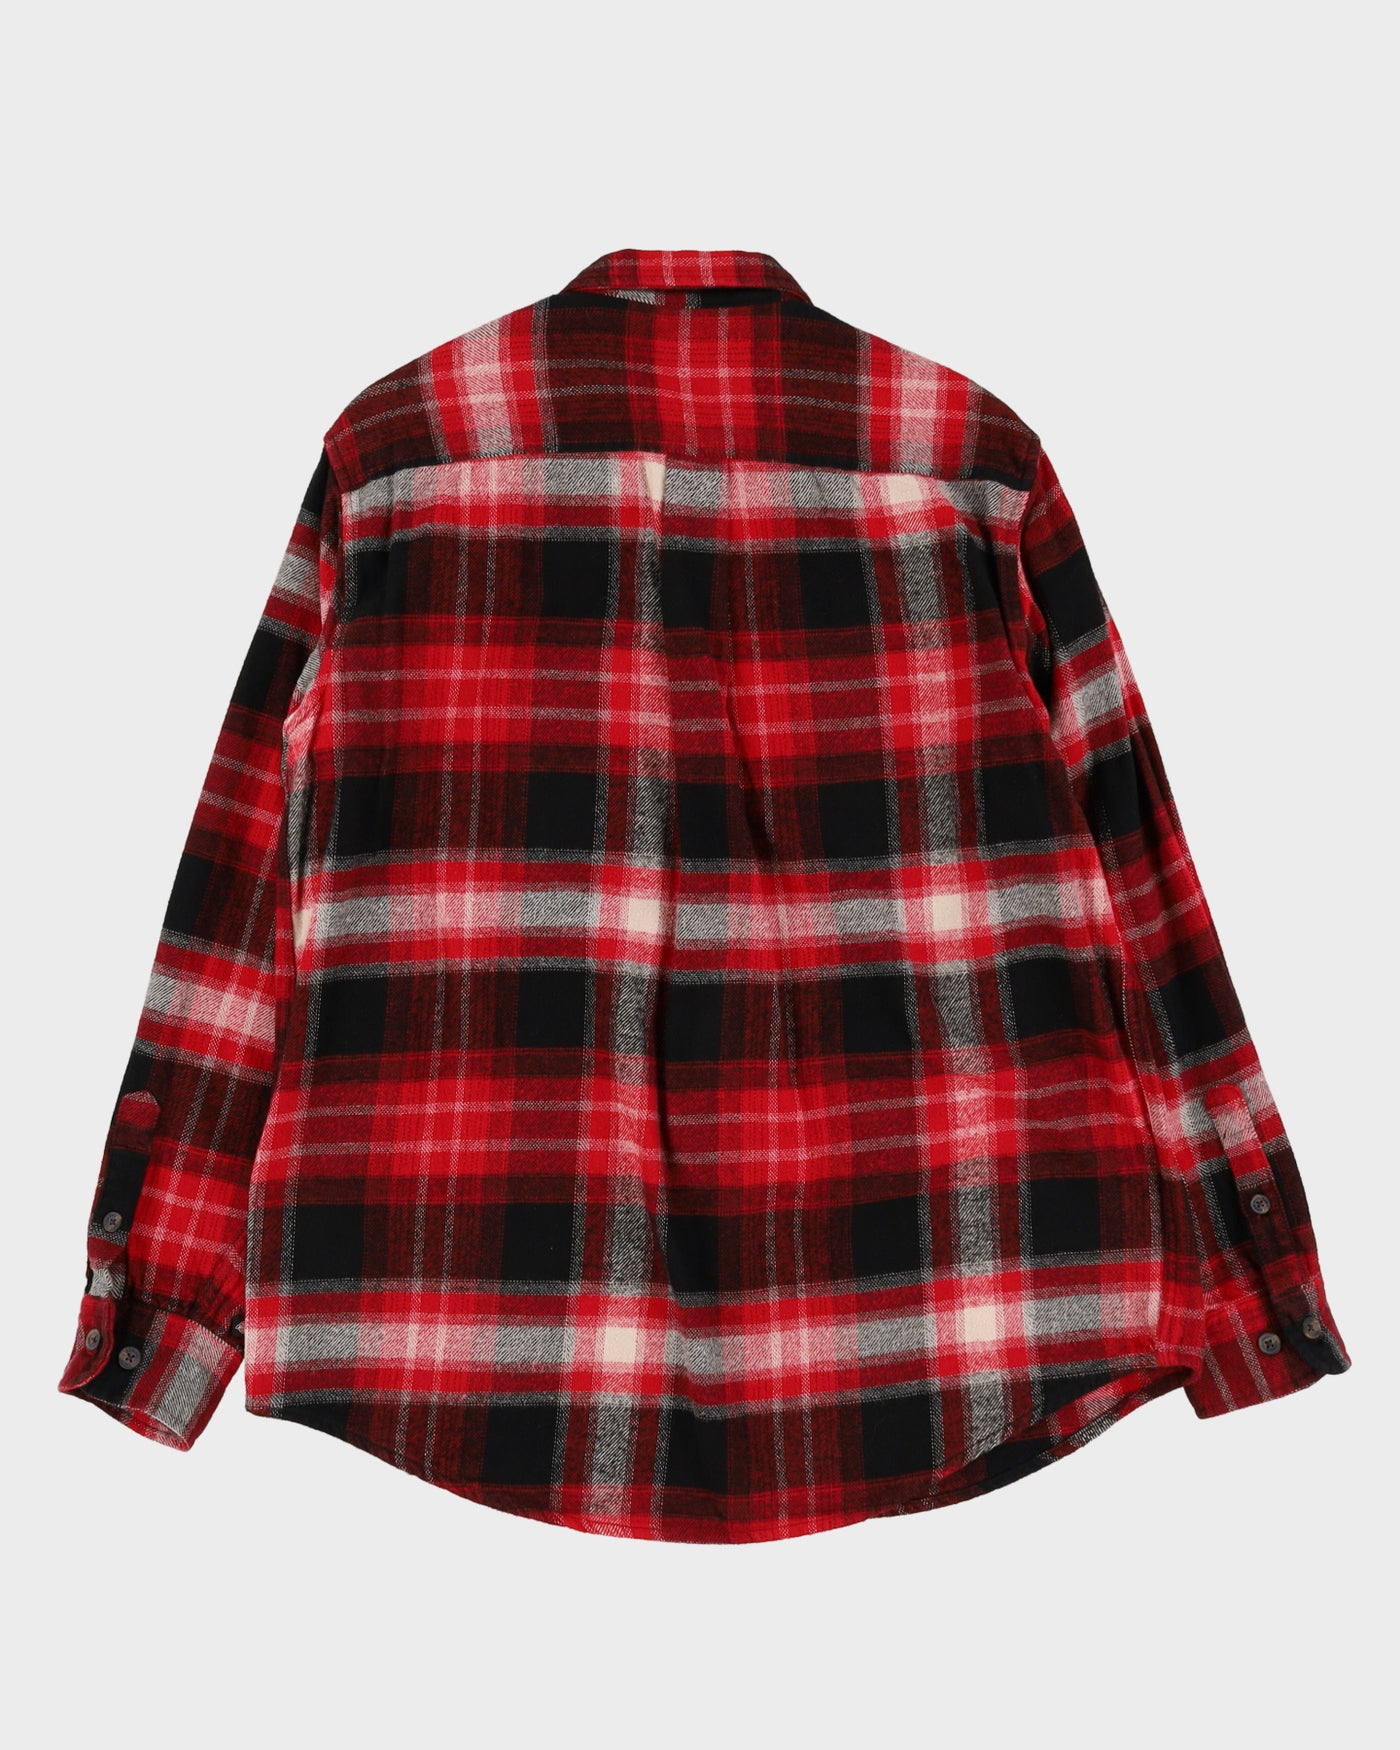 Dickies Red Checked Flannel Shirt - L